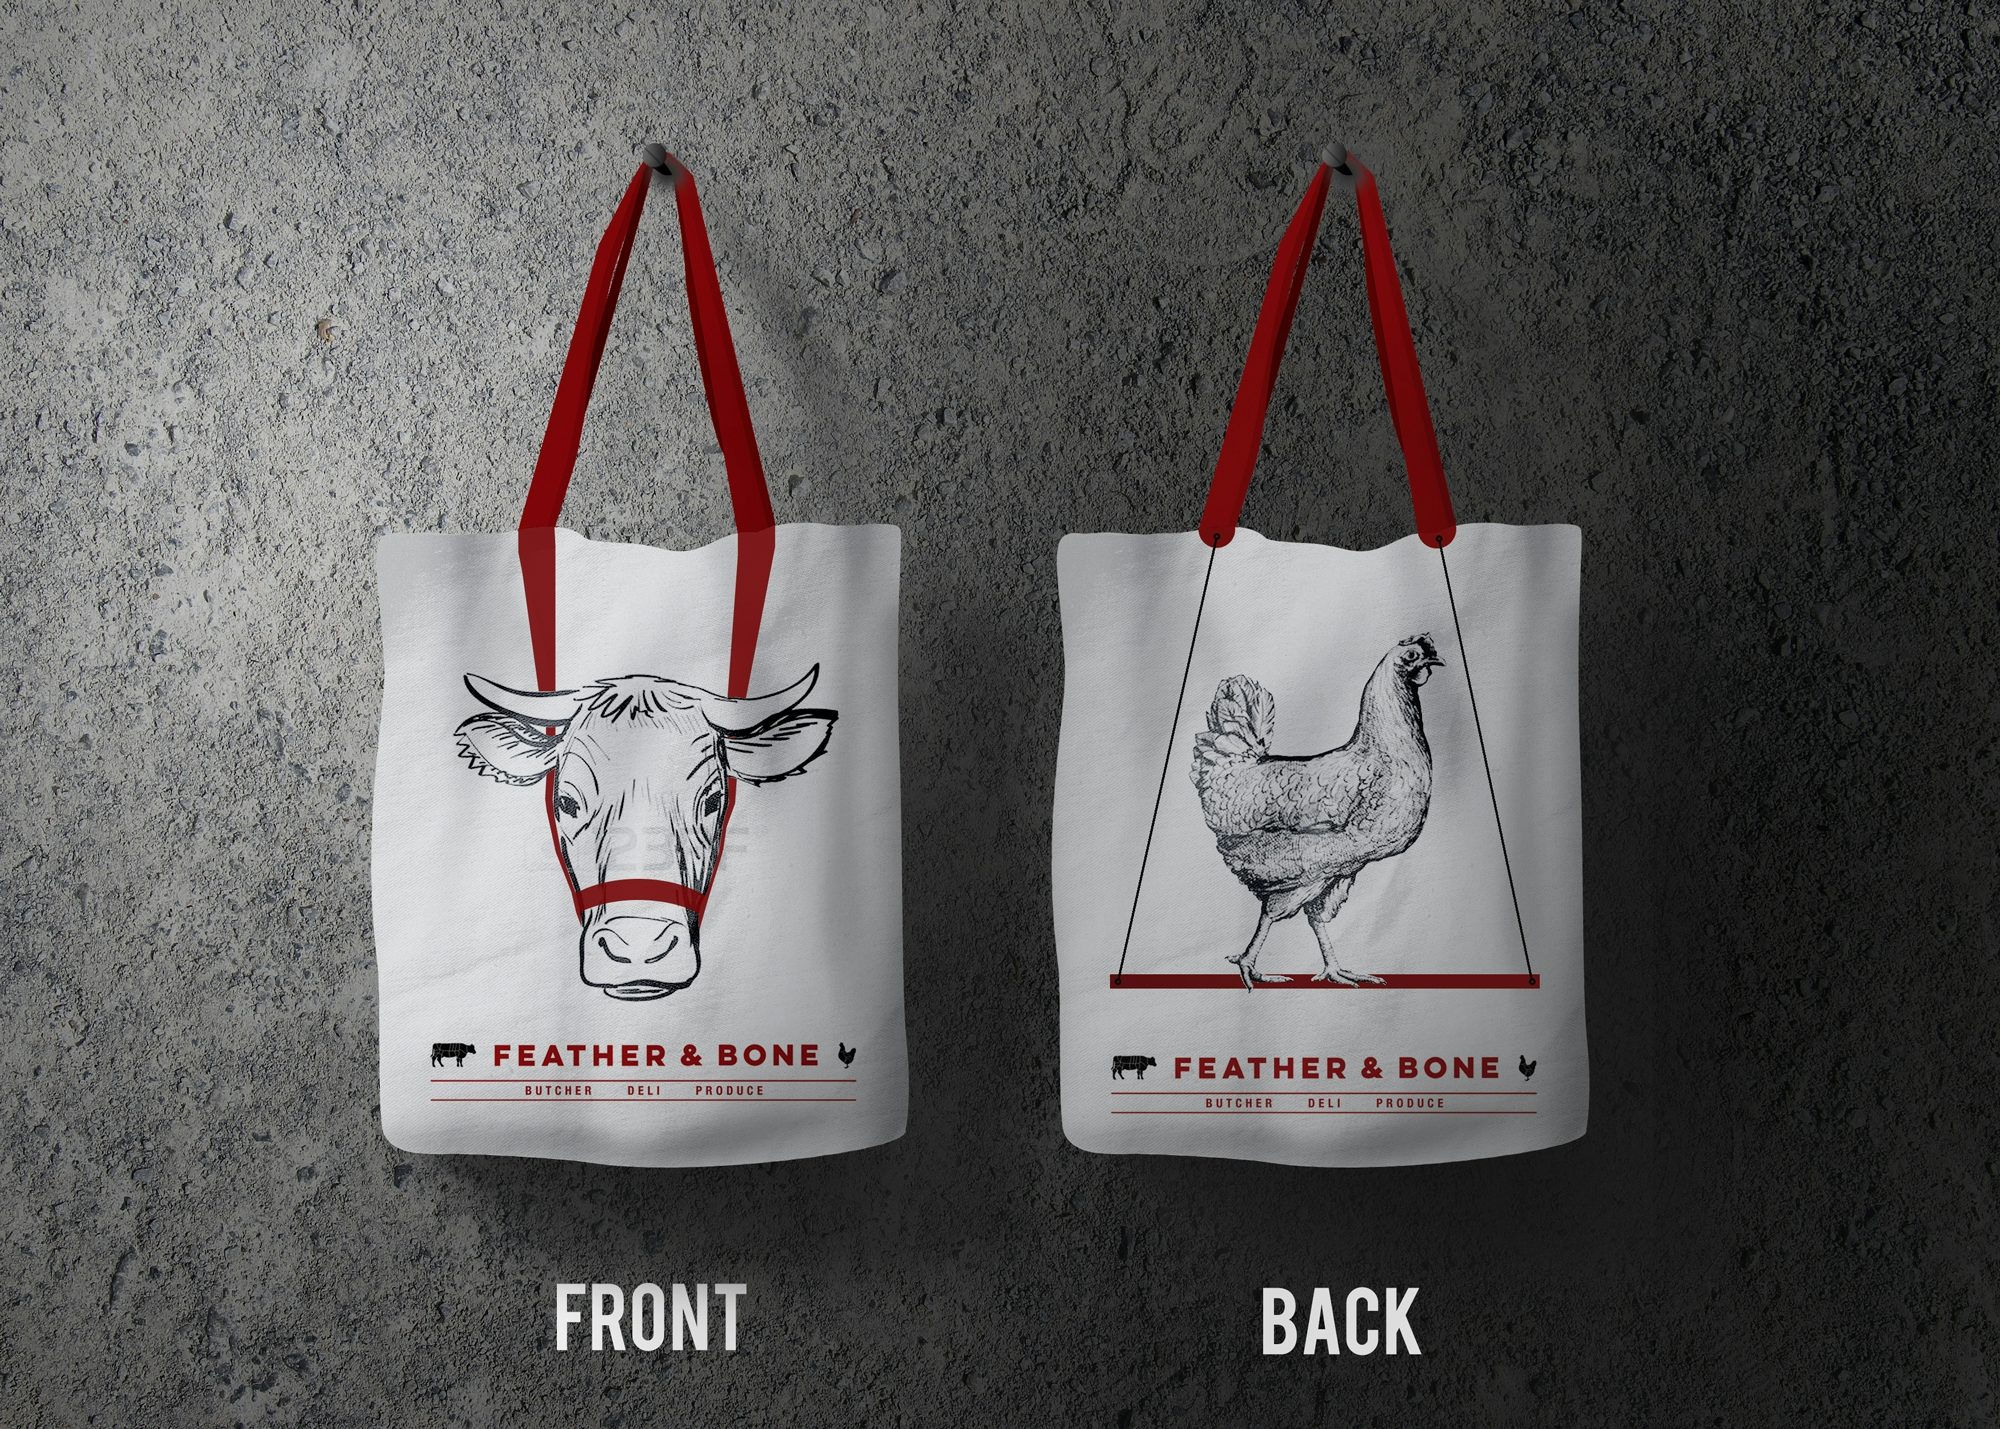 The impact of creative shopping bags on advertising and products